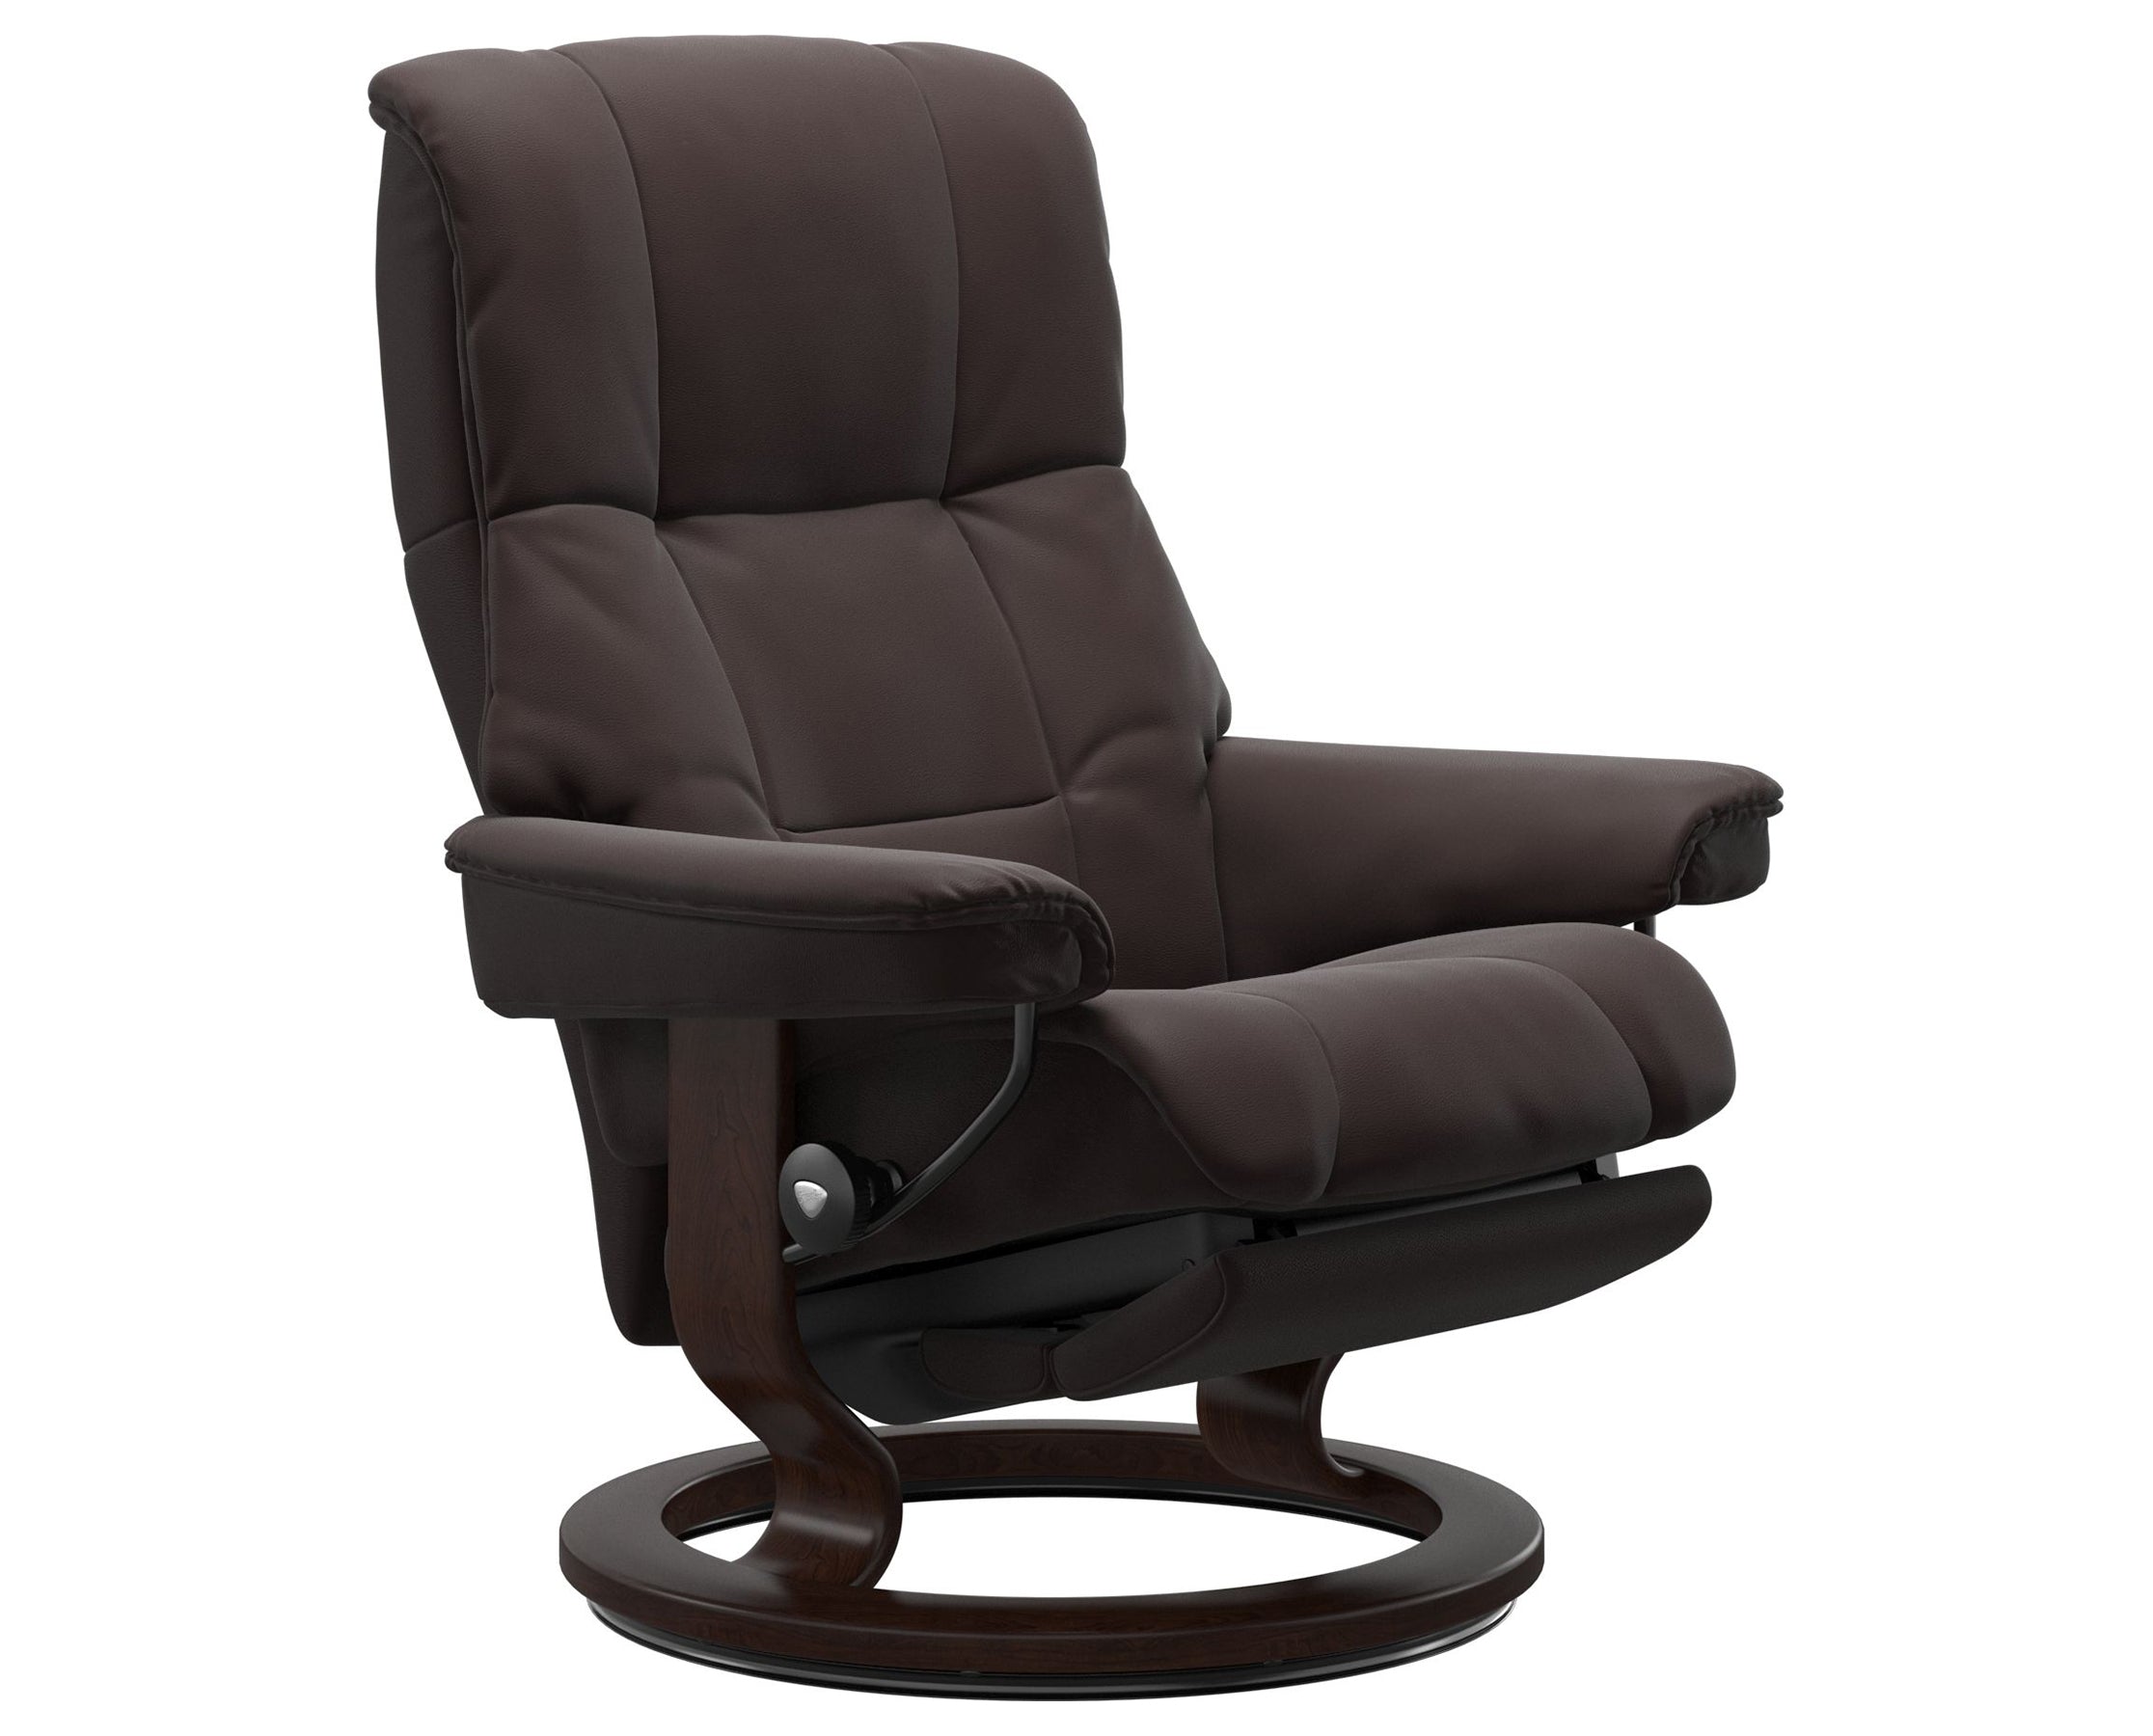 Paloma Leather Chocolate M/L & Brown Base | Stressless Mayfair Classic Power Recliner | Valley Ridge Furniture